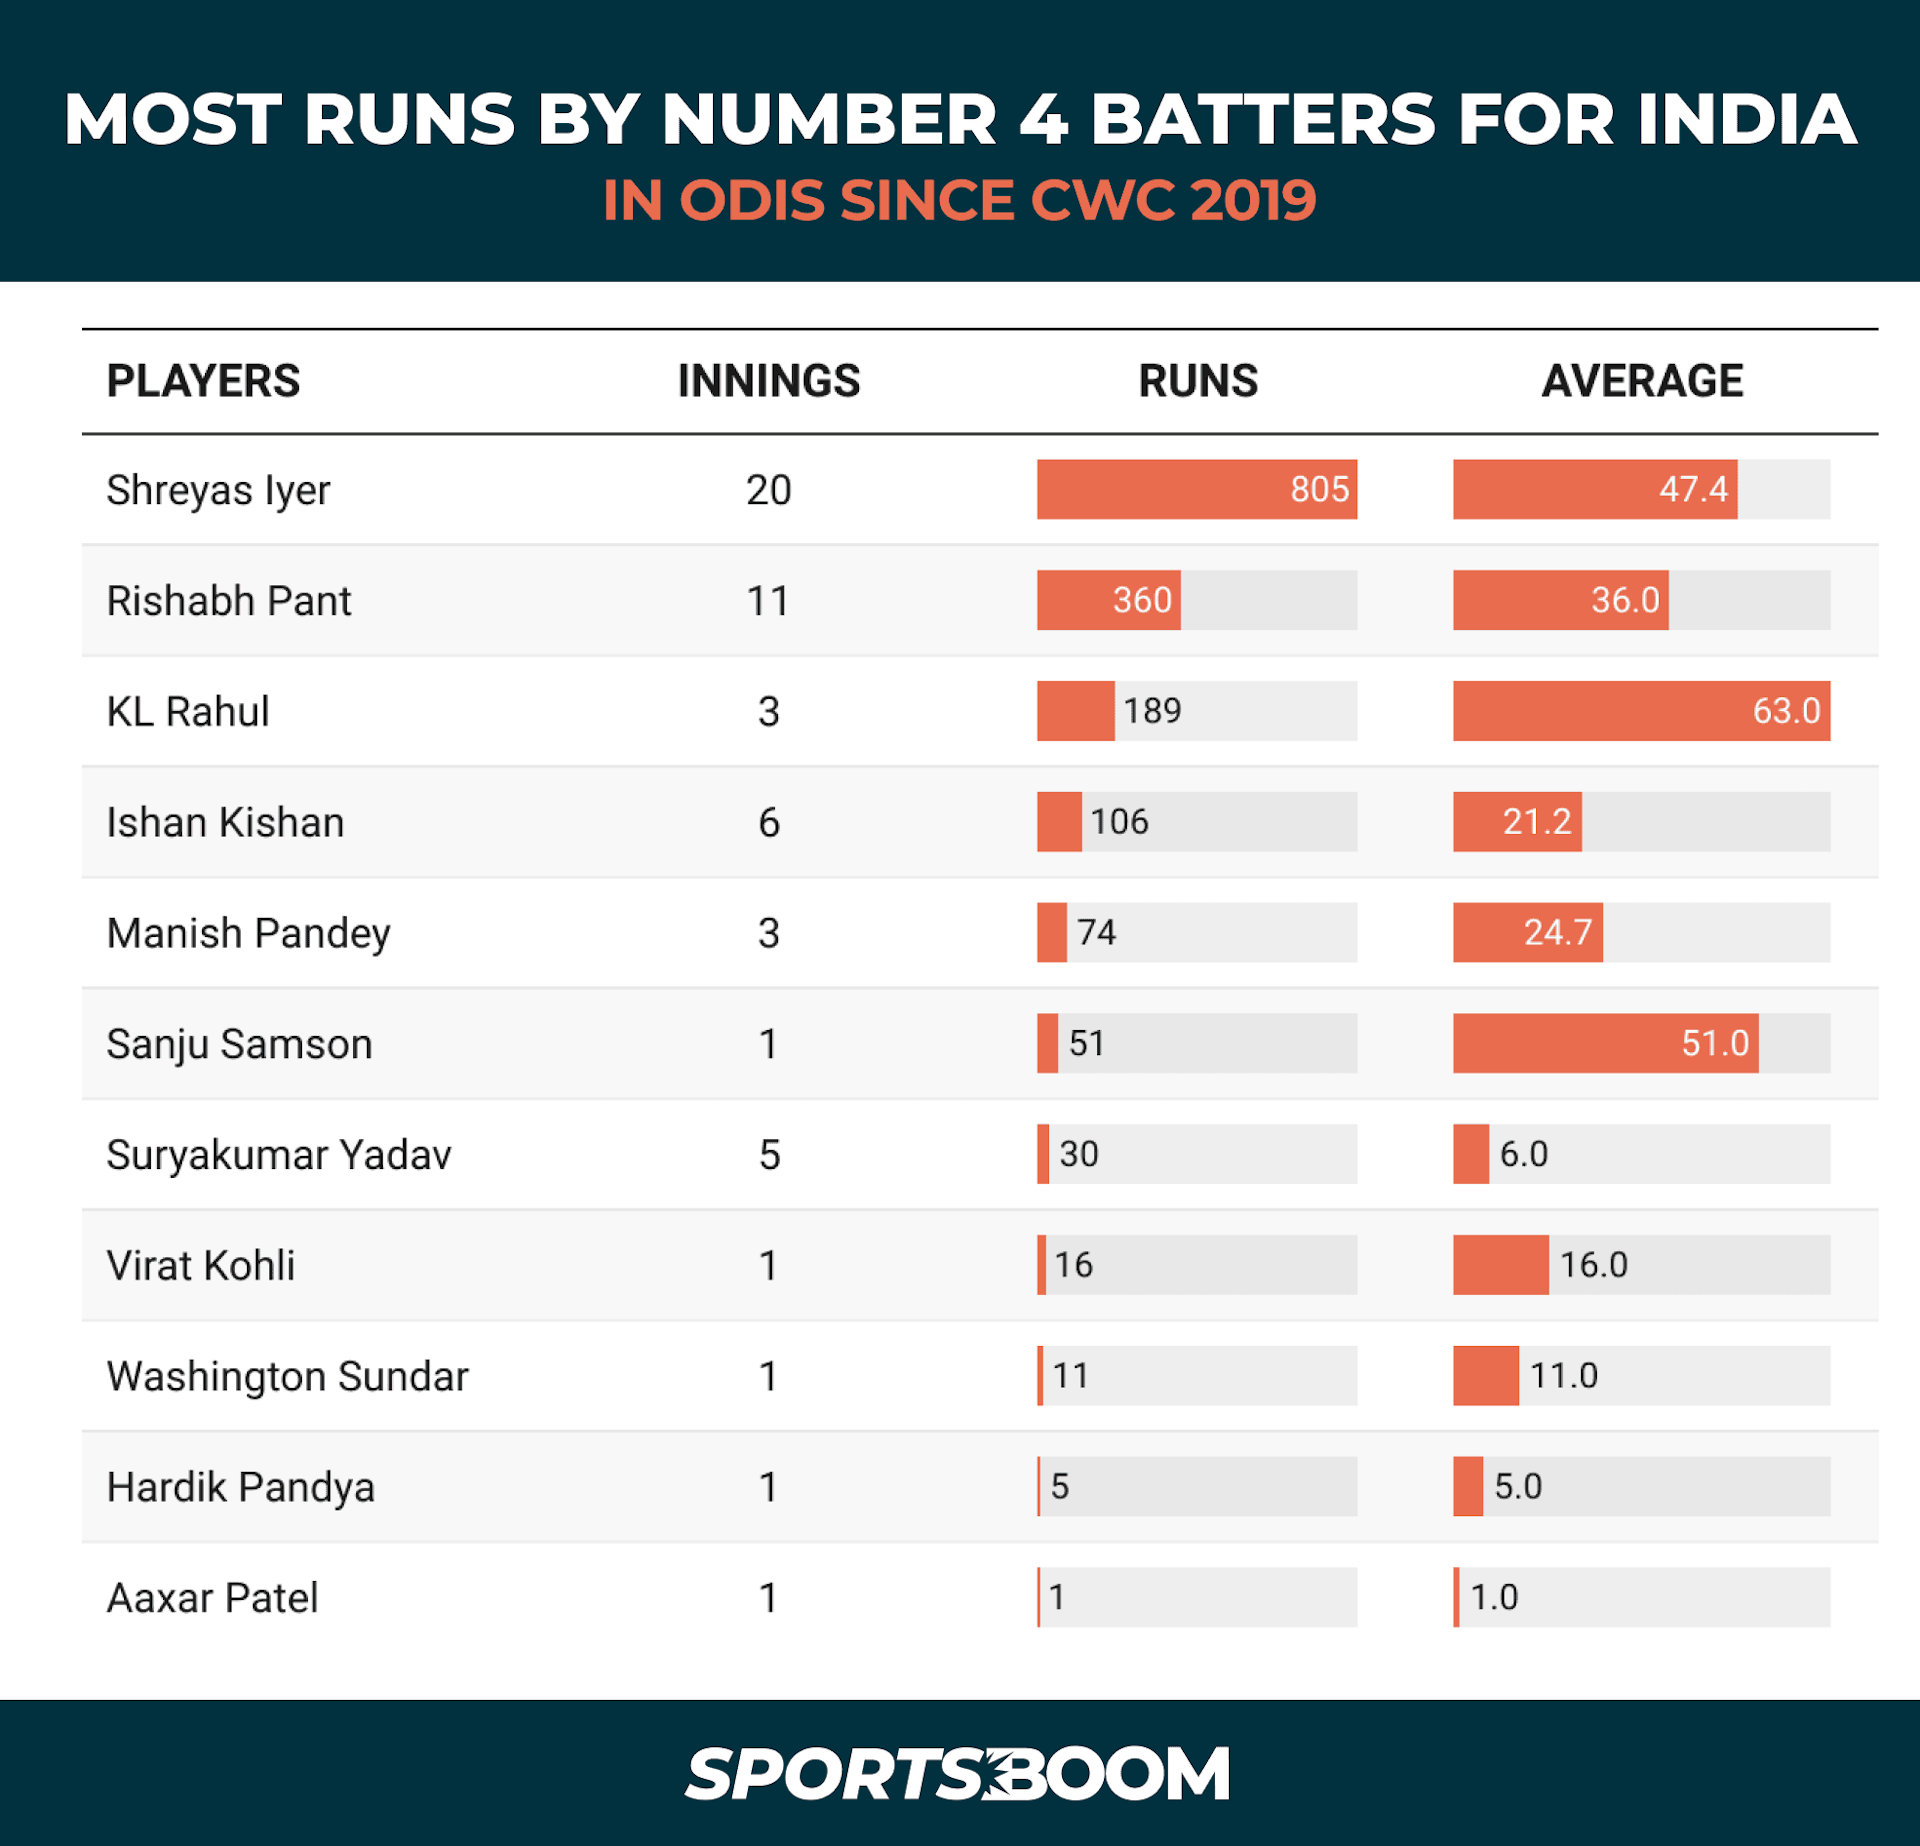 Most Runs by Number 4 Batters in ODIs for India since CWC 2019 sb.png